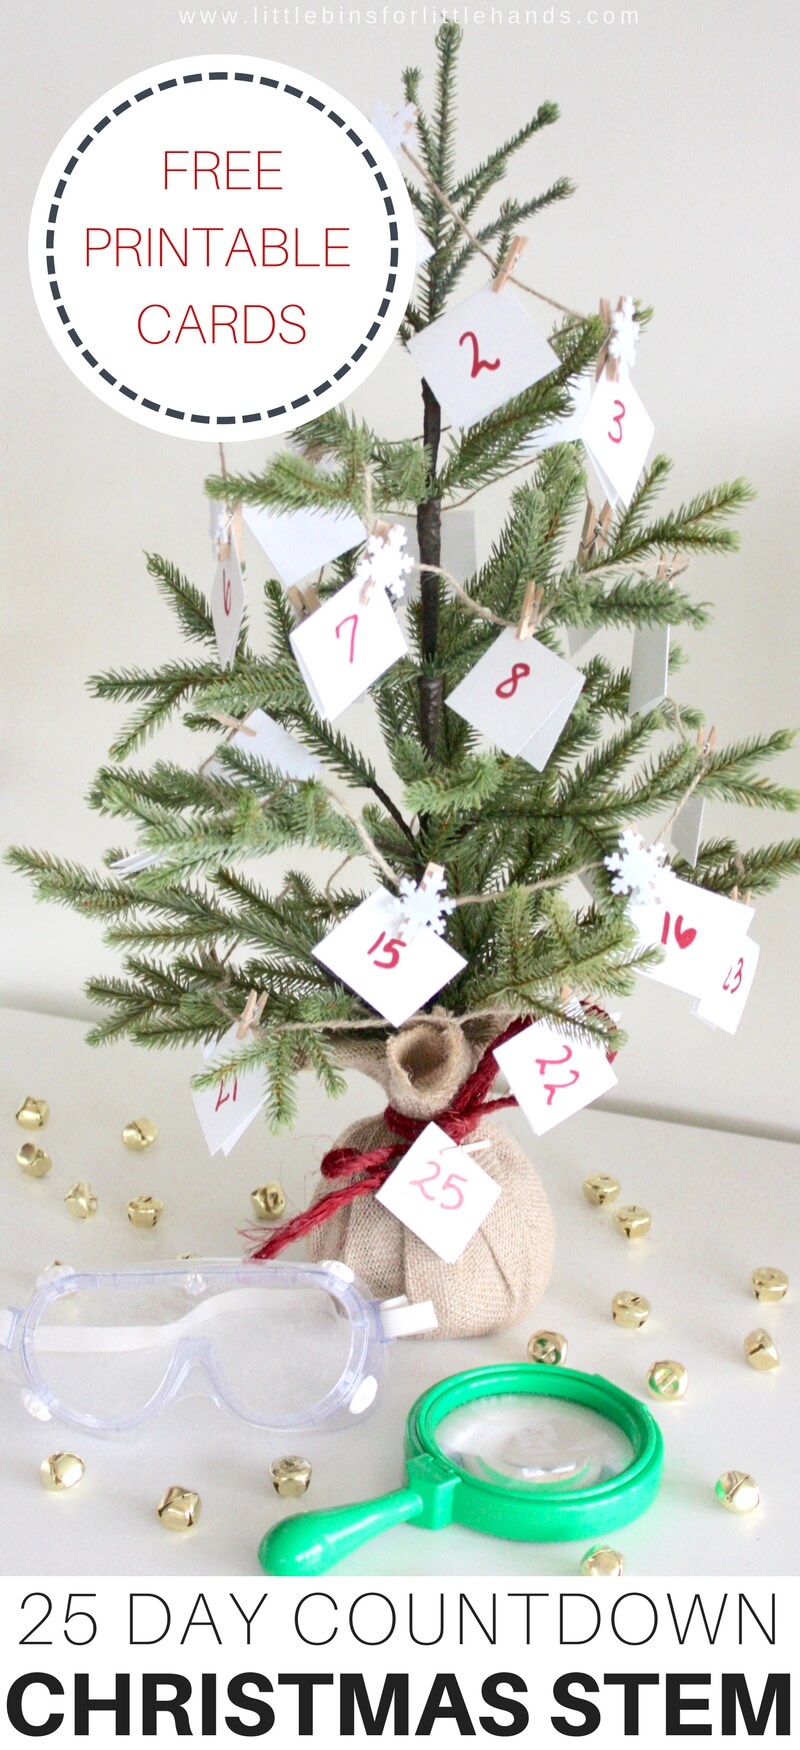 Start off the season with a 25 Day Christmas STEM Countdown Calendar Easy Christmas science